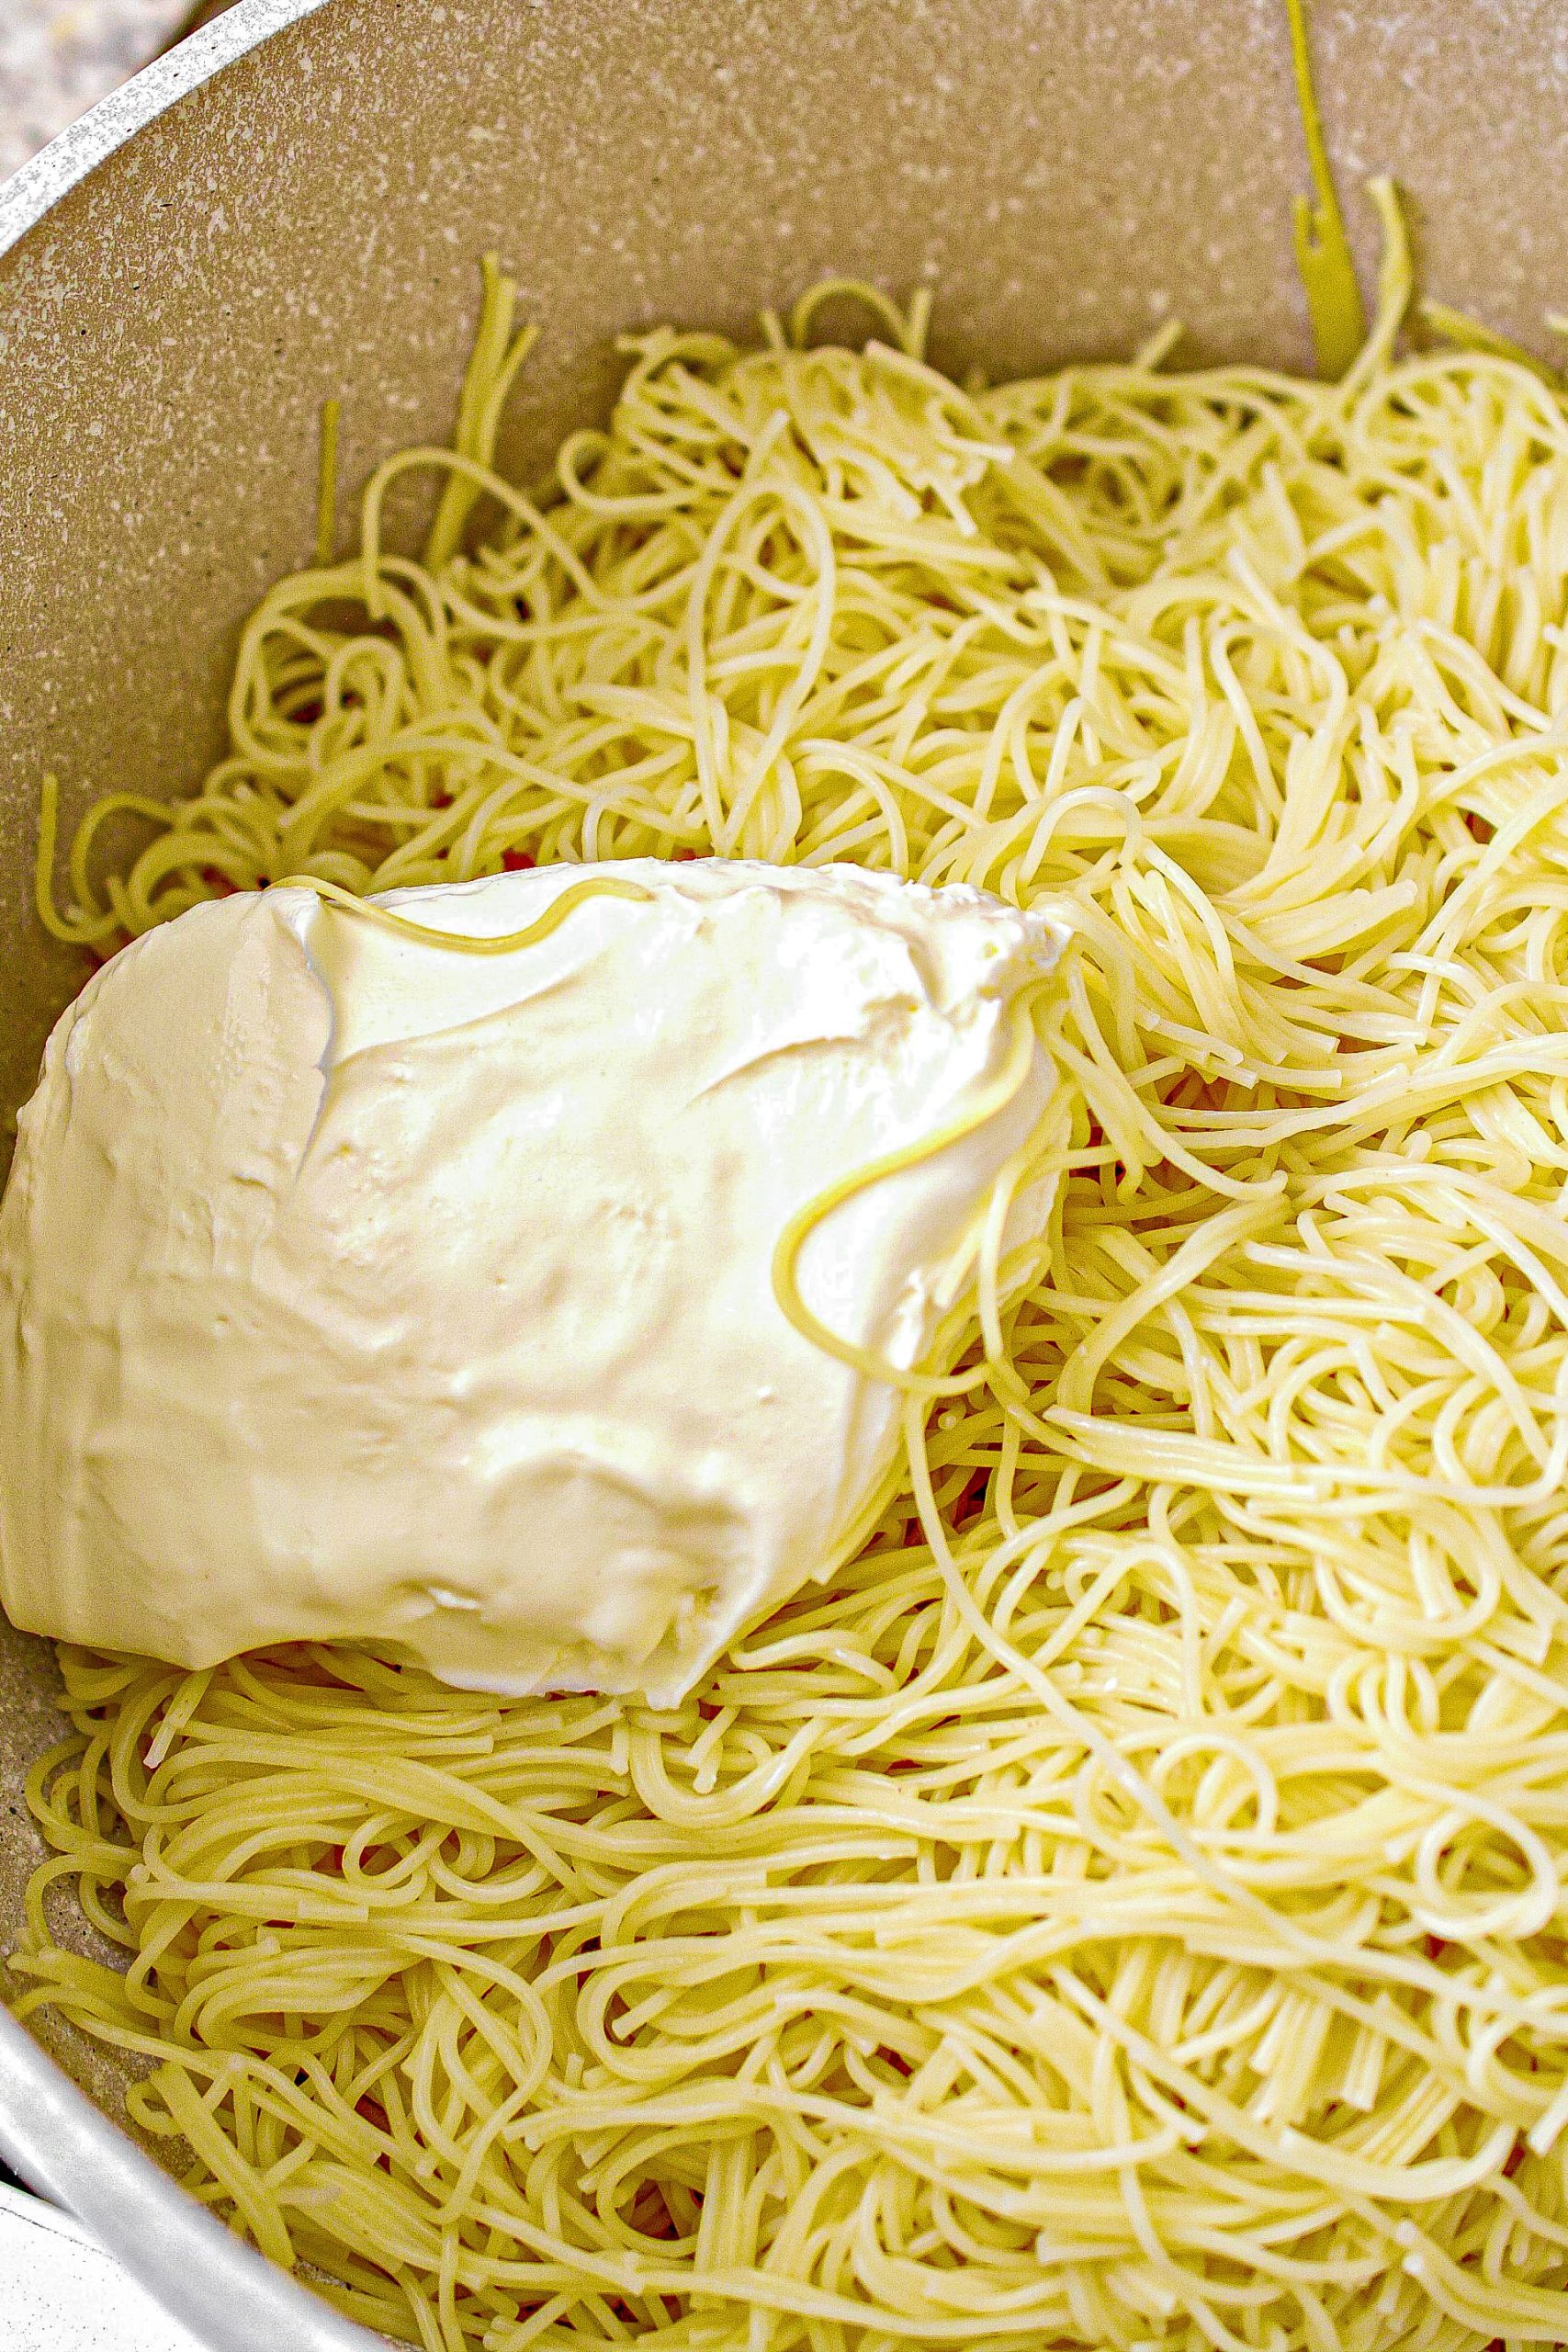 Return the spaghetti to the pot, and mix with the cream cheese until combined.